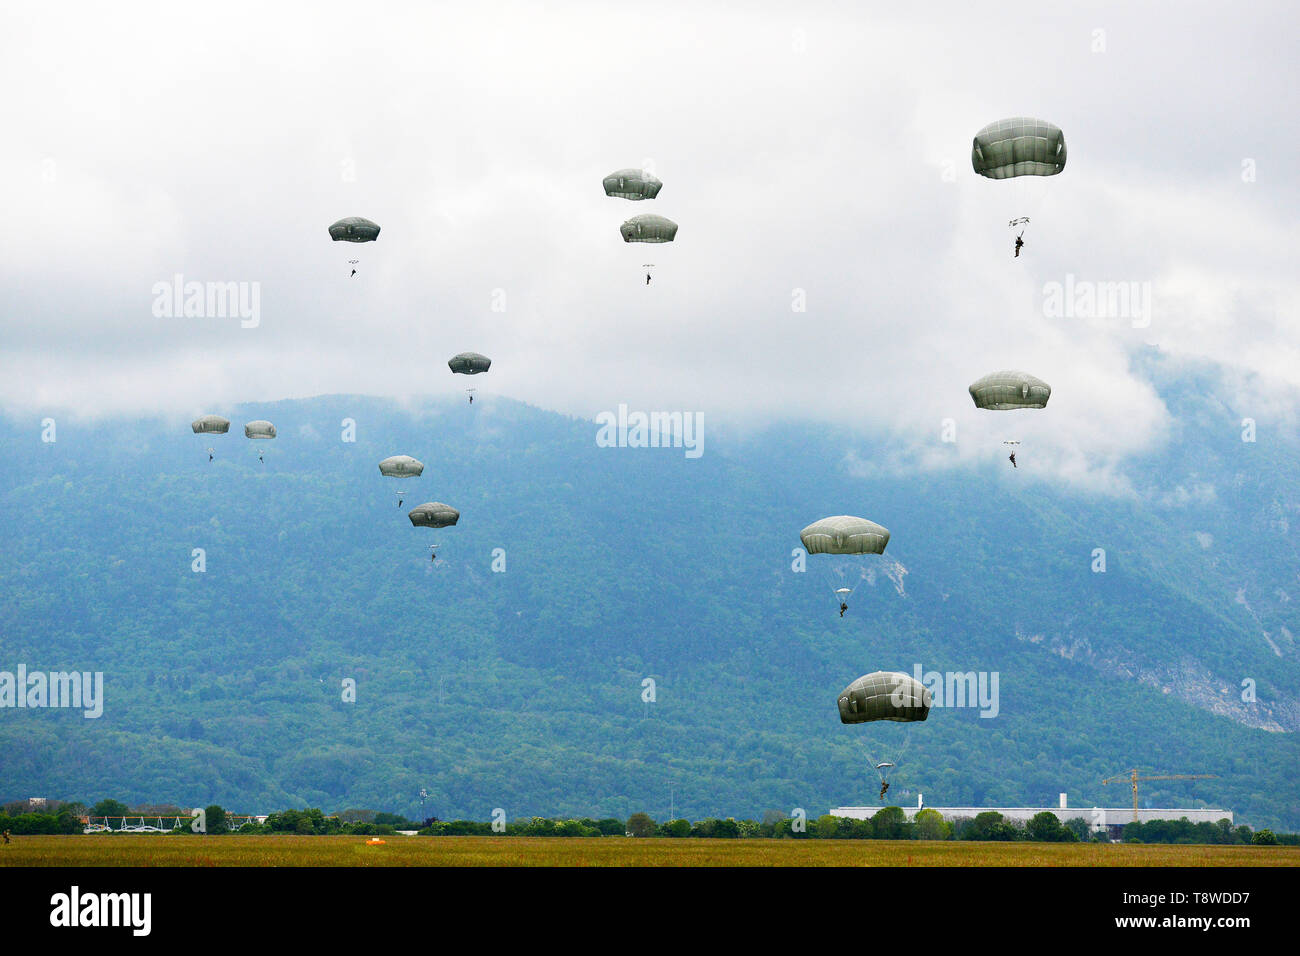 U.S. Army Paratroopers assigned to 54th Brigade Engineer Battalion, 173rd Airborne Brigade, descends onto Juliet Drop Zone, Pordenone, Italy after exiting 12th Combat Aviation Brigade CH-47 Chinook helicopter, during airborne operation, May 9, 2019. The 173rd Airborne Brigade is the U.S. Army's Contingency Response Force in Europe, capable of projecting ready forces anywhere in the U.S. European, Africa or Central Commands' areas of responsibility. (U.S. Army's Photos by Paolo Bovo) Stock Photo